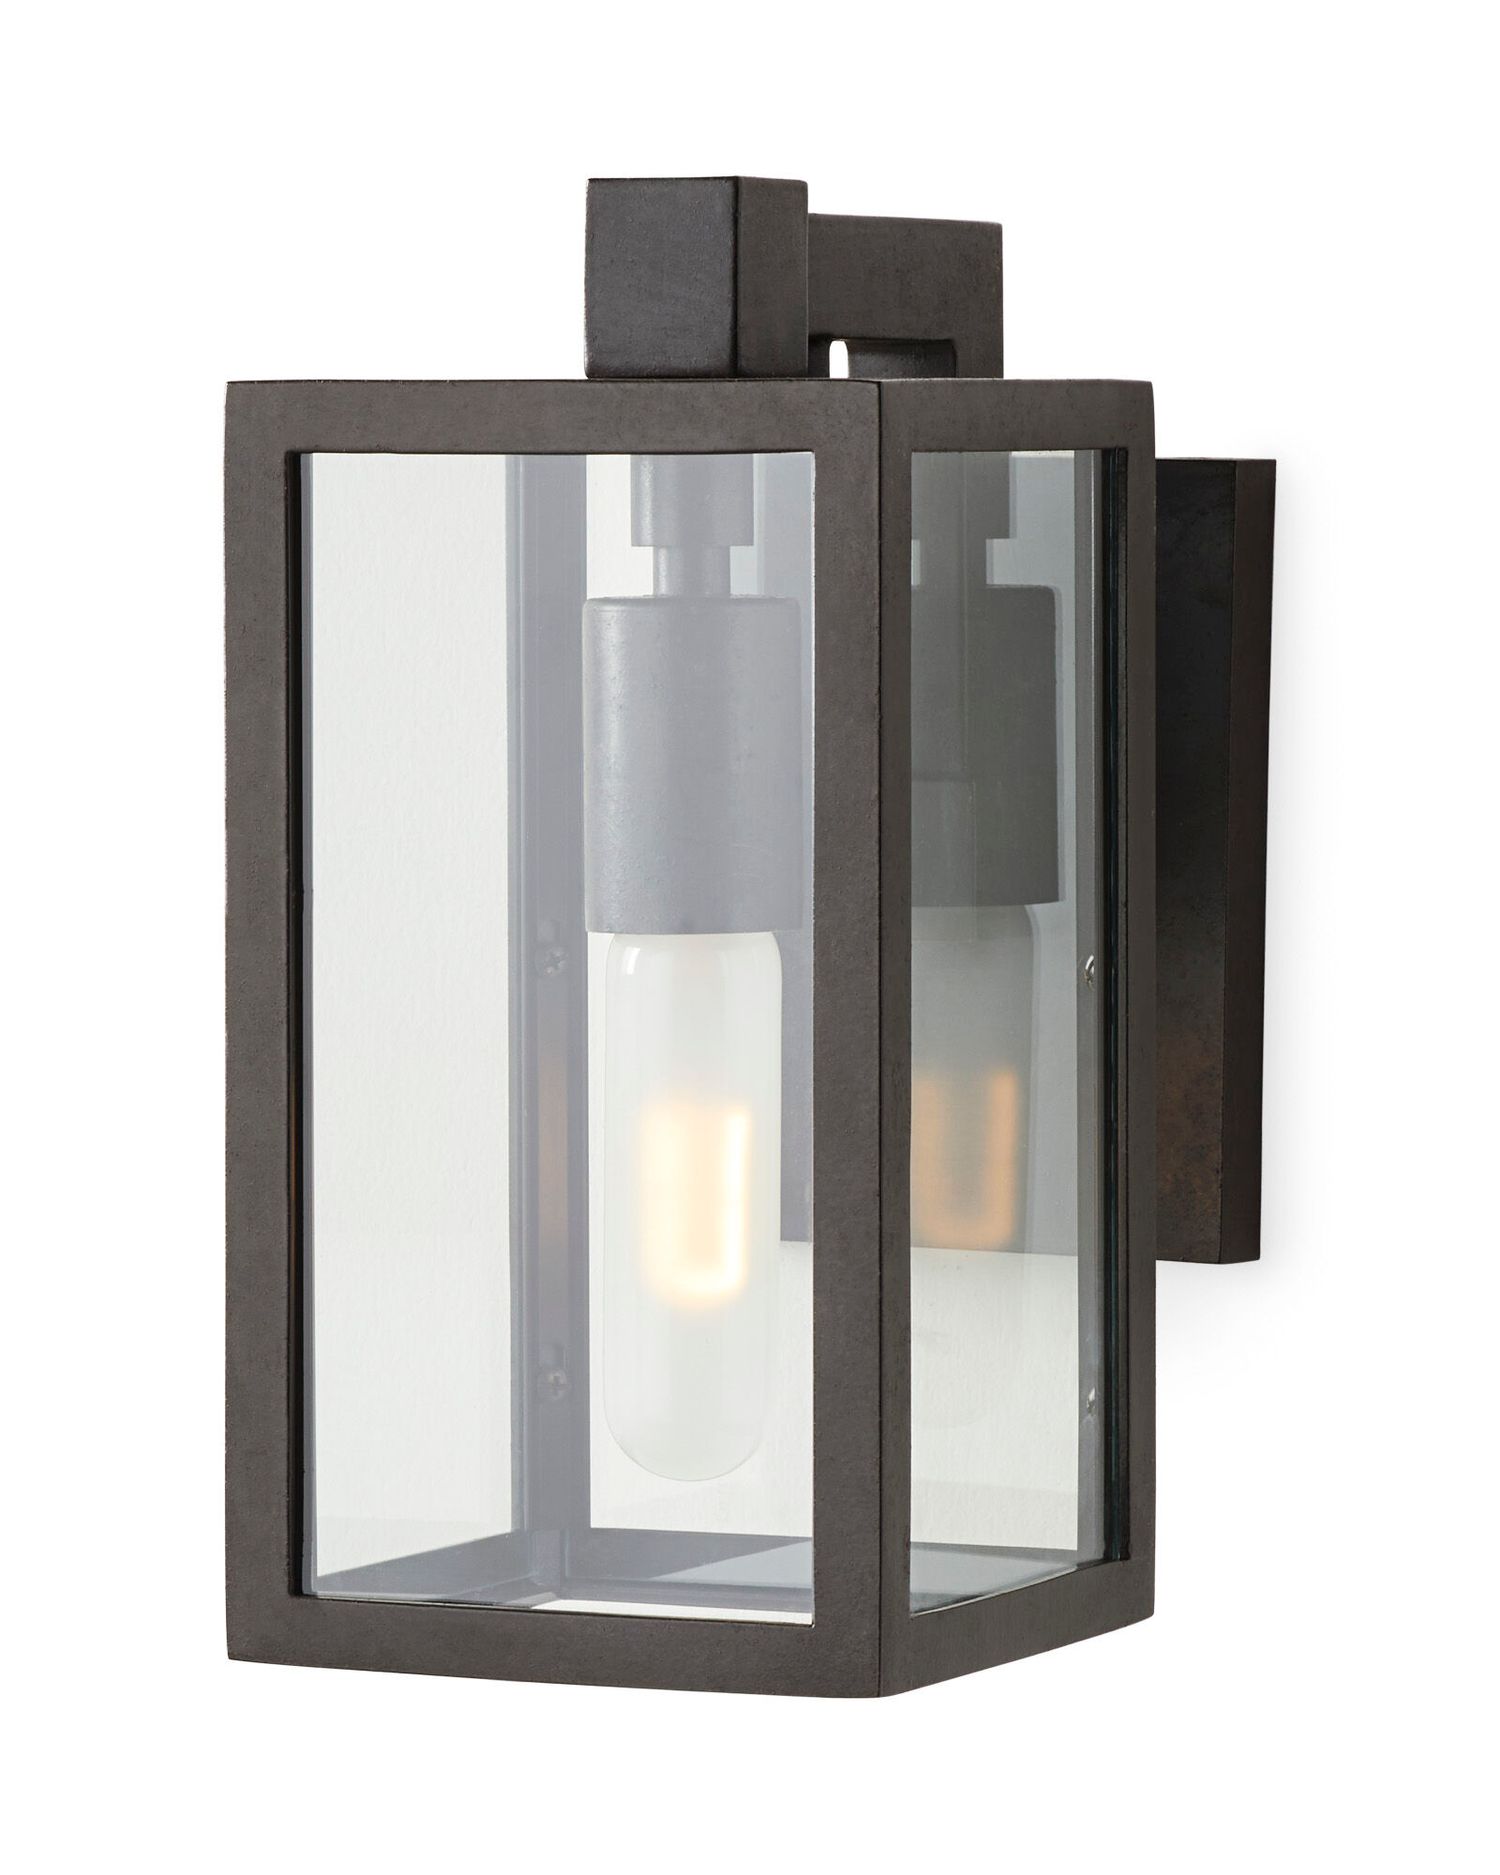 Shop Warwick Outdoor Sconce  from Serena & Lily on Openhaus